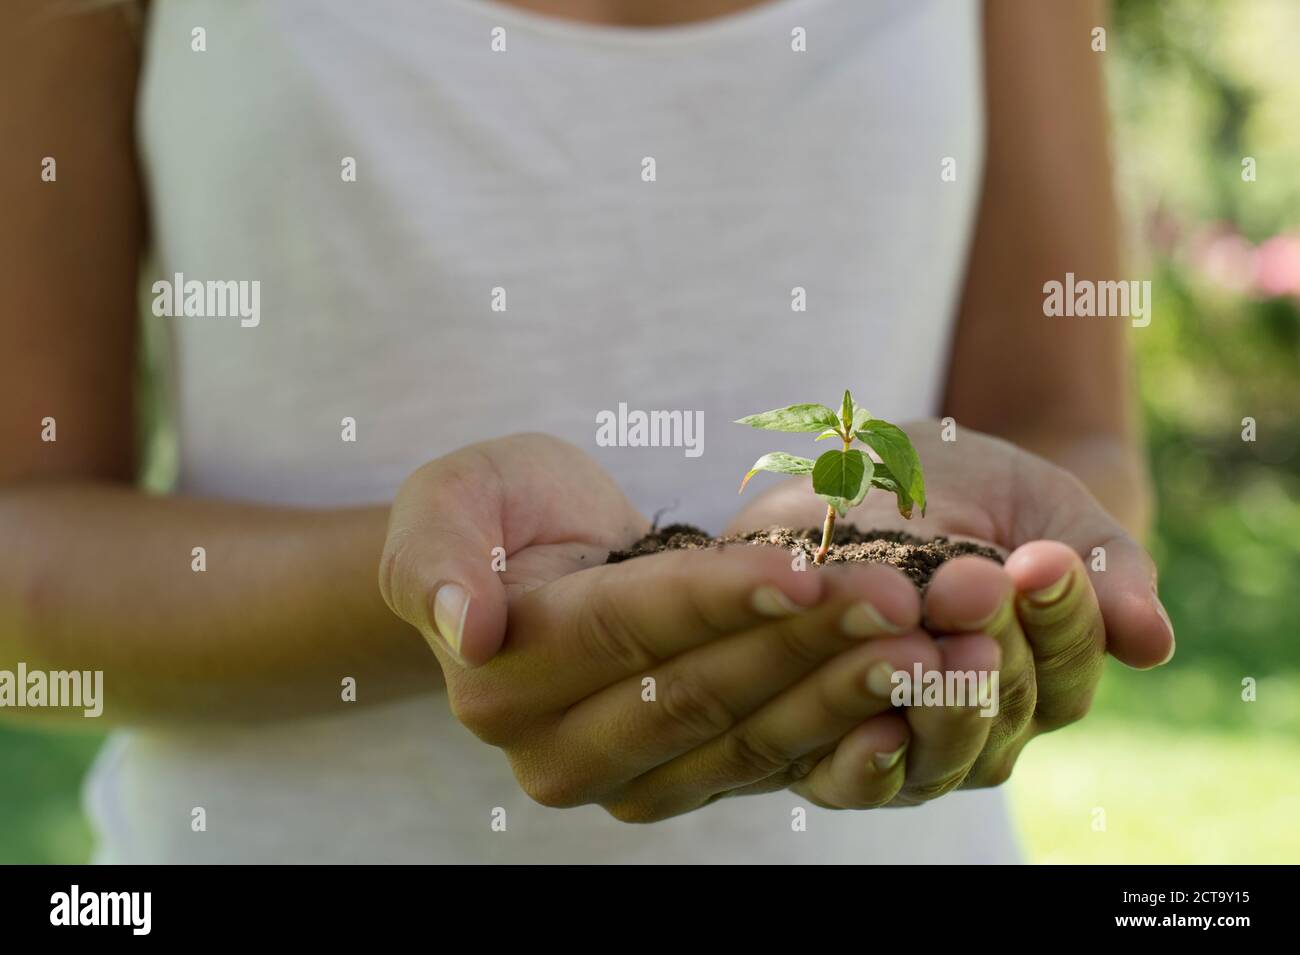 Germany, Human hands holding seedling Stock Photo